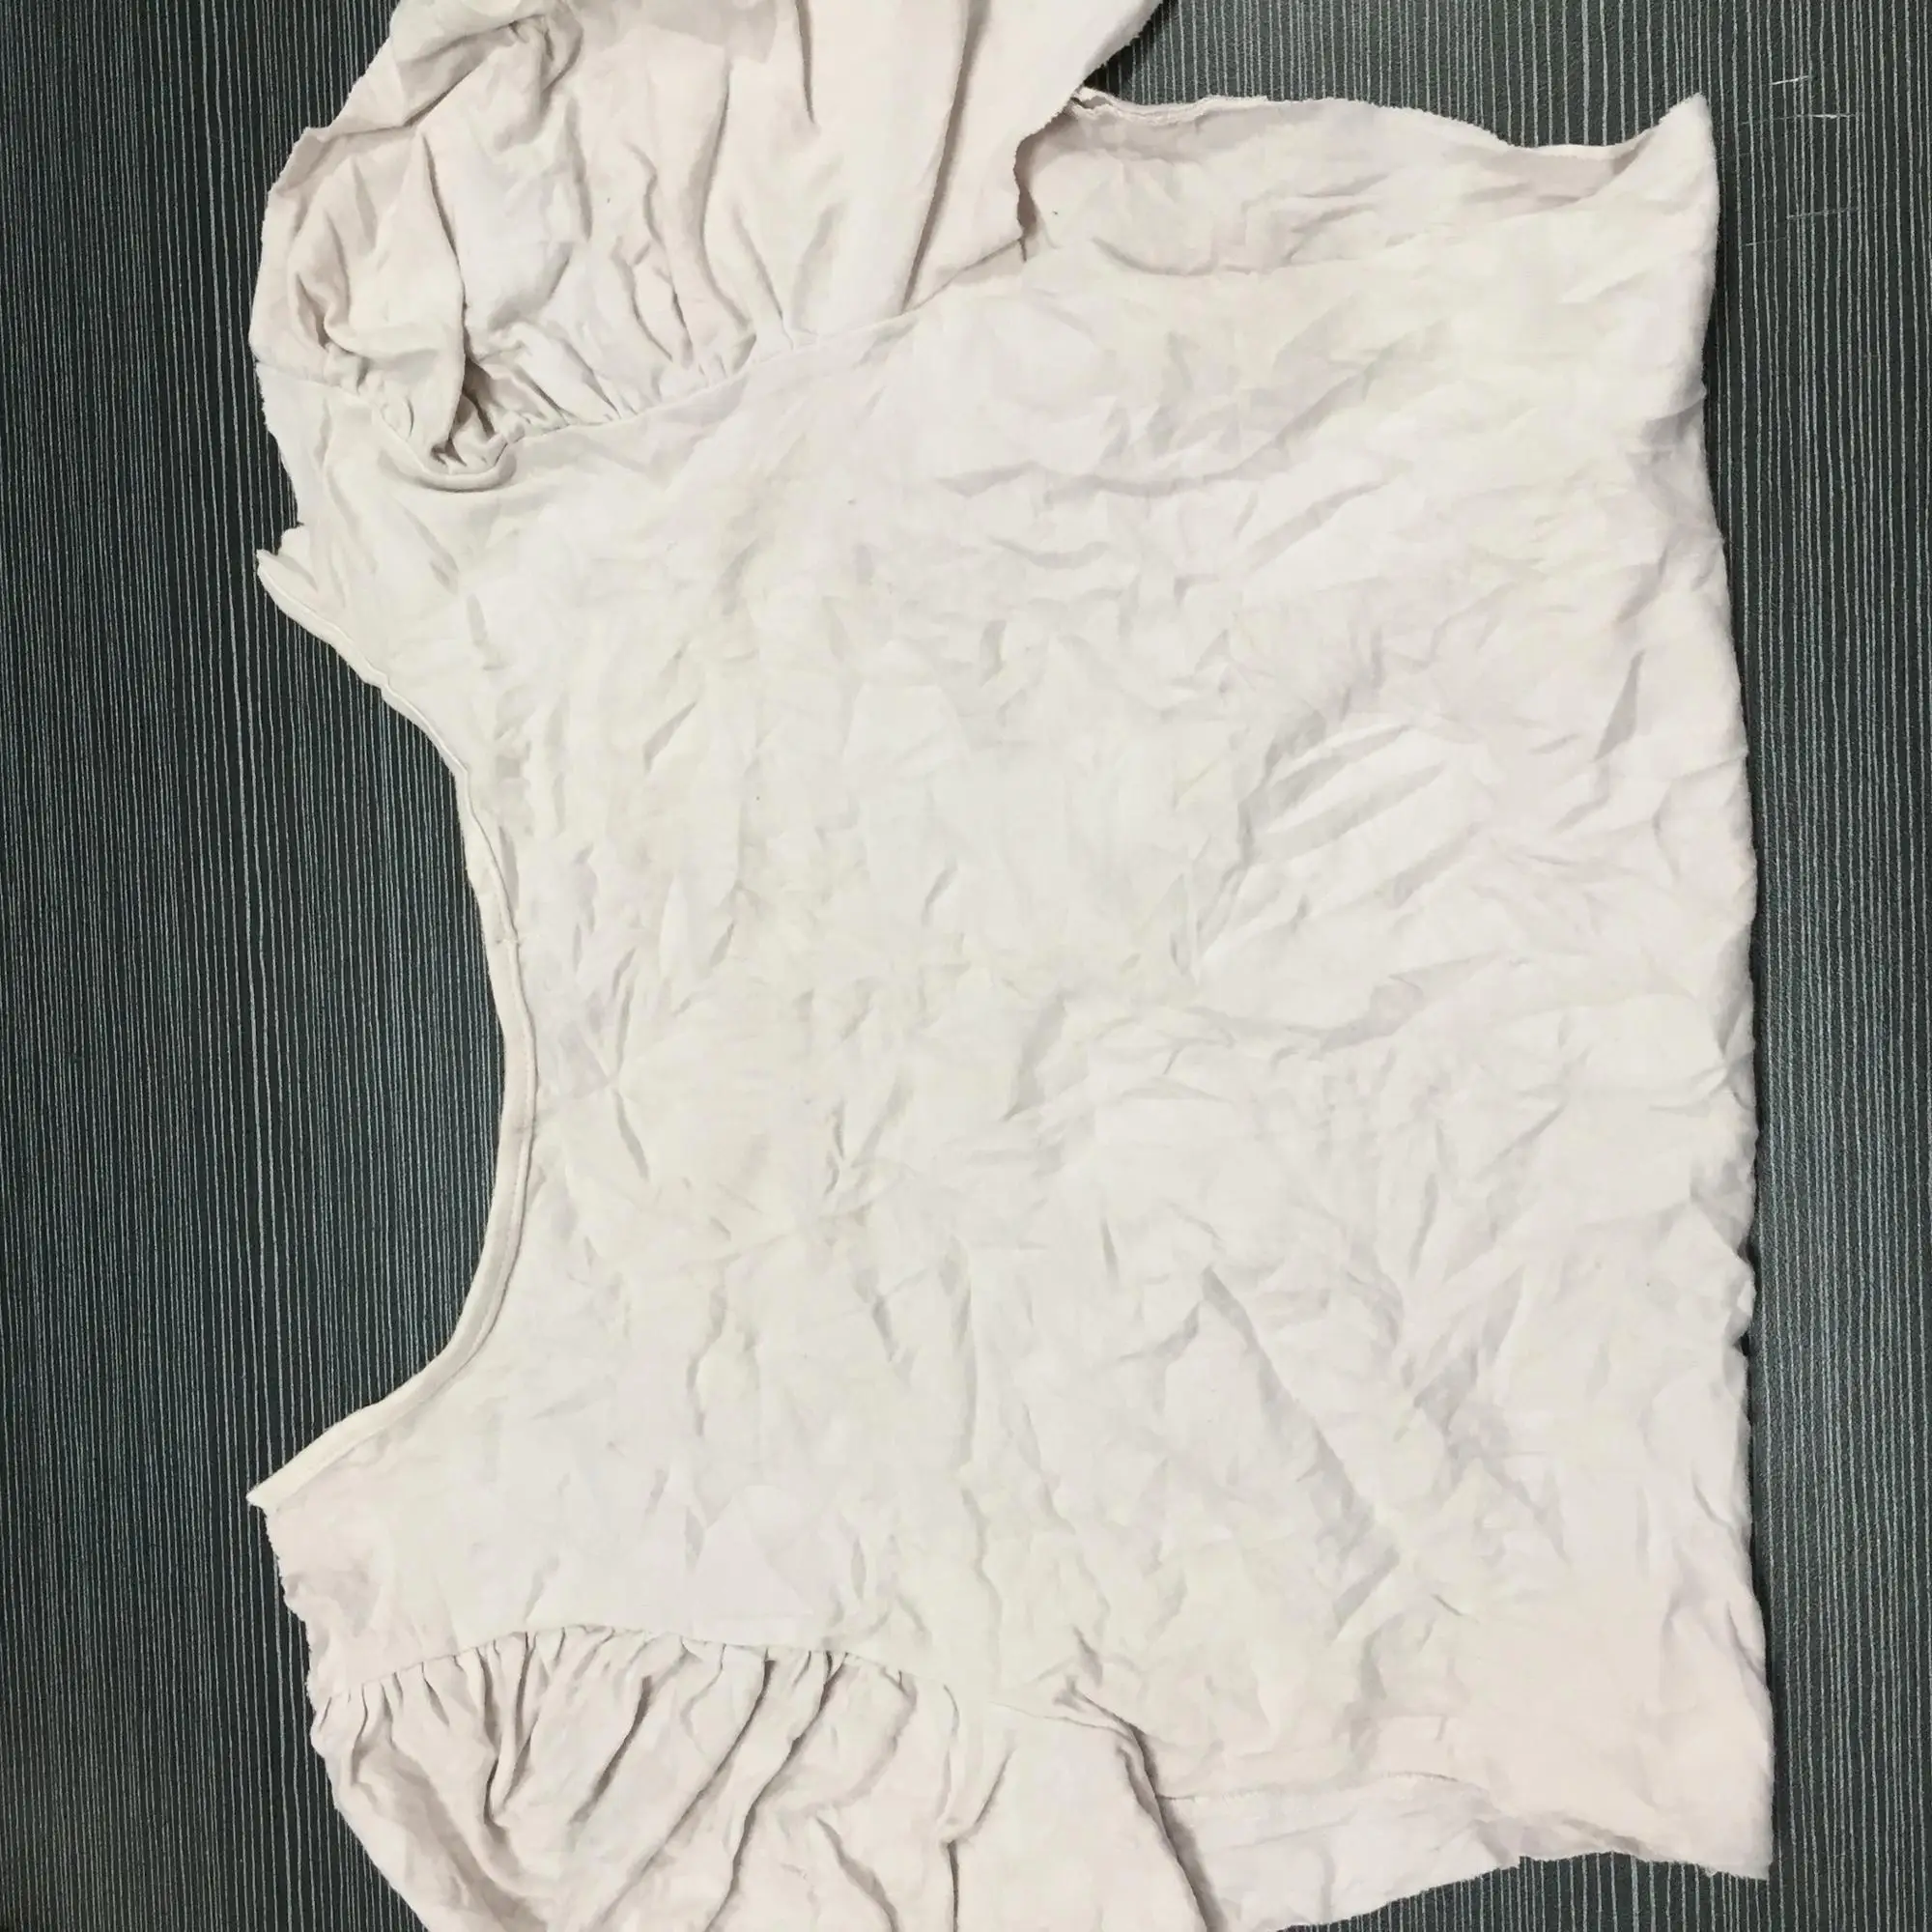 Cheap Price White Used T Shirt Cotton Rags - Buy Cotton Rags,White ...